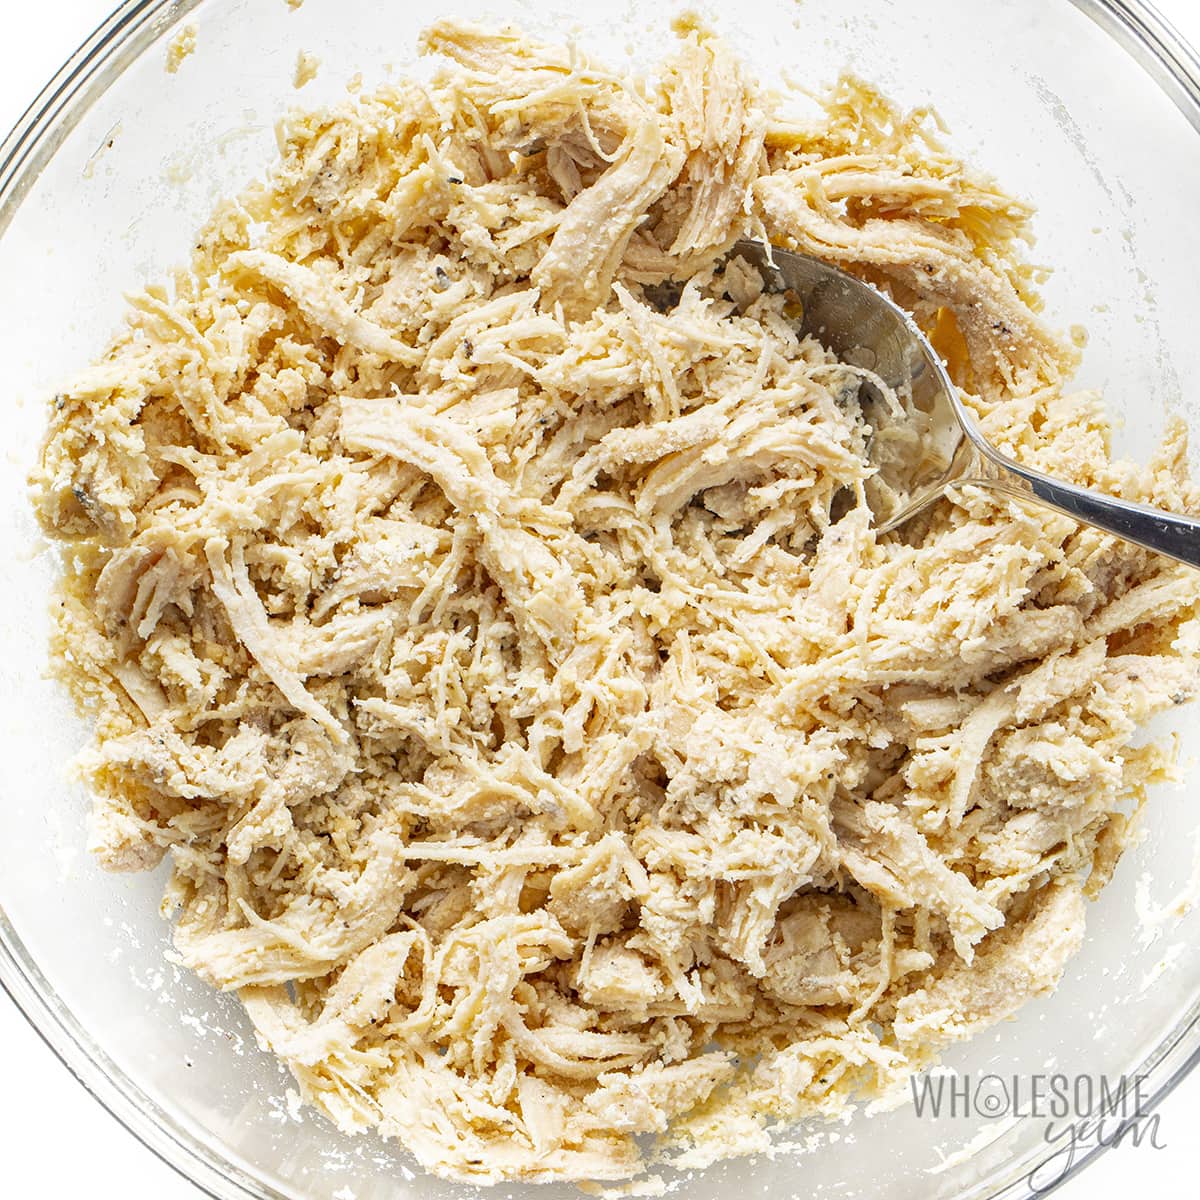 Shredded chicken, grated parmesan cheese, minced garlic, and sea salt in a bowl.